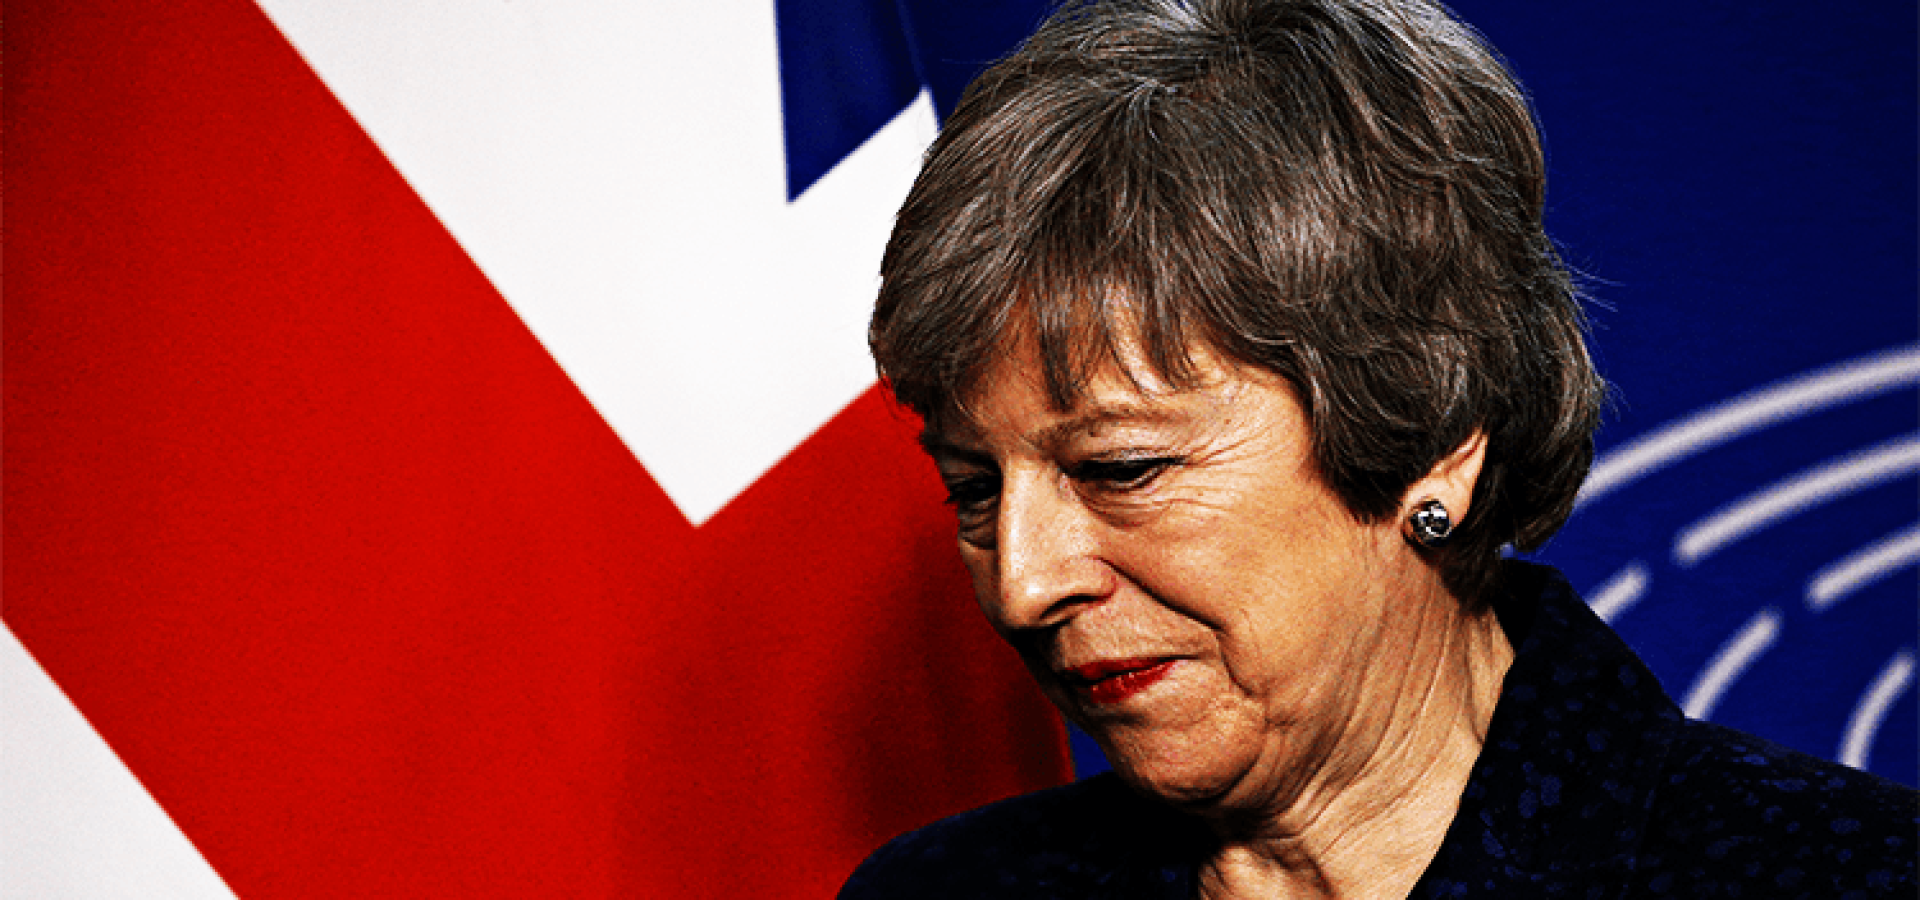 Prime Minister Theresa May Caused Pound Lows - Wibest Broker